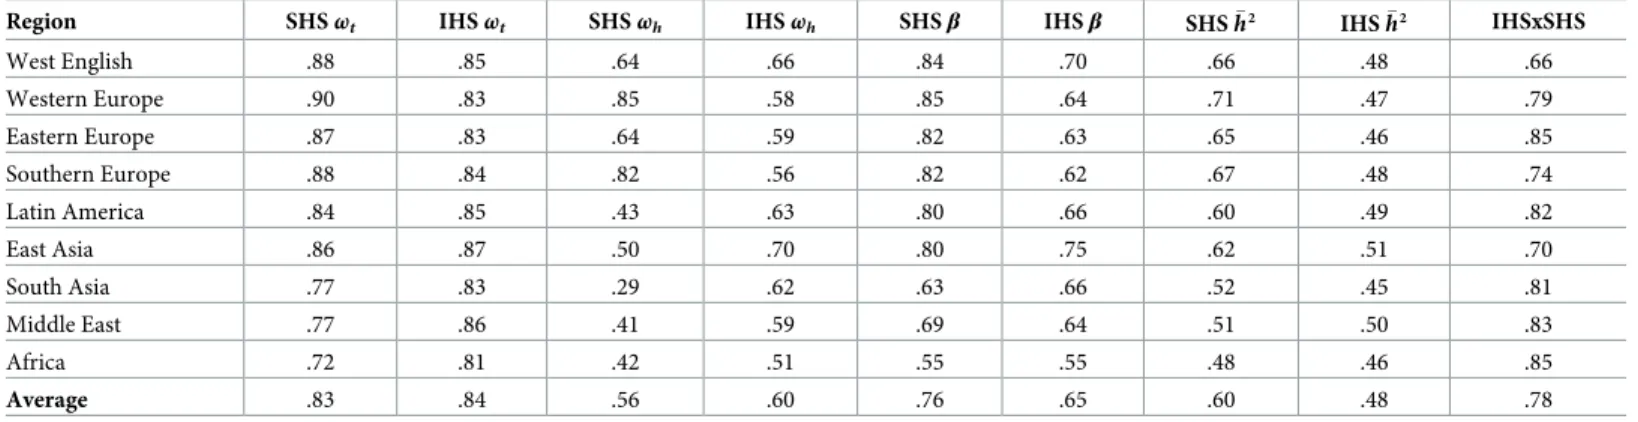 Table 4. Reliability measures for the Subjective Happiness Scale (SHS) and Interdependent Happiness Scale (IHS) averaged by region.